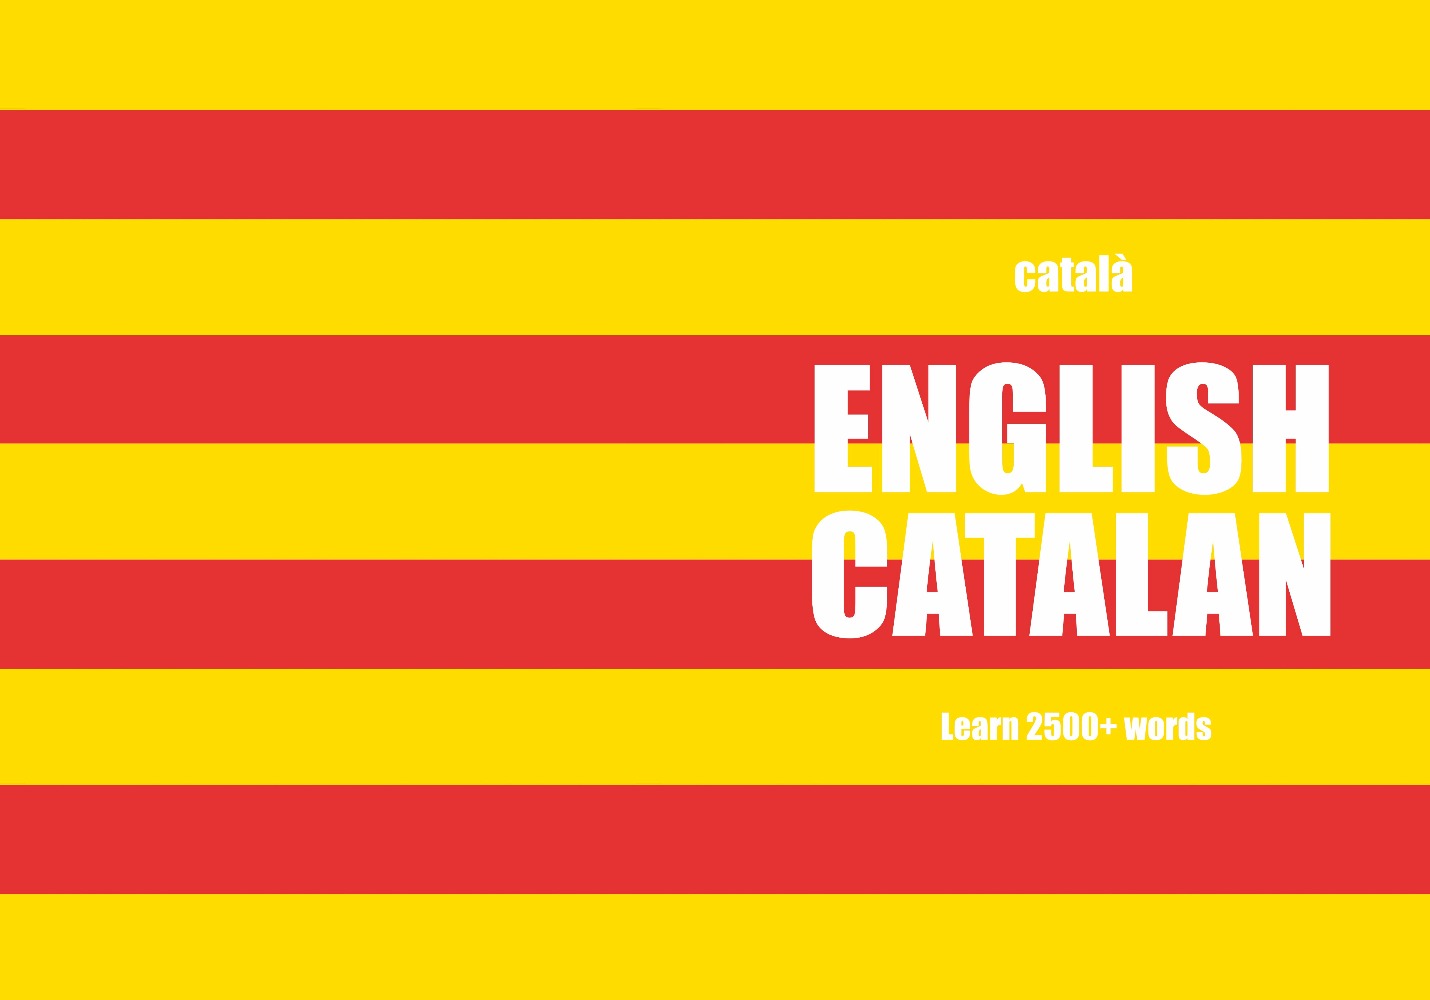 English-Catalan fill in the blanks notebook